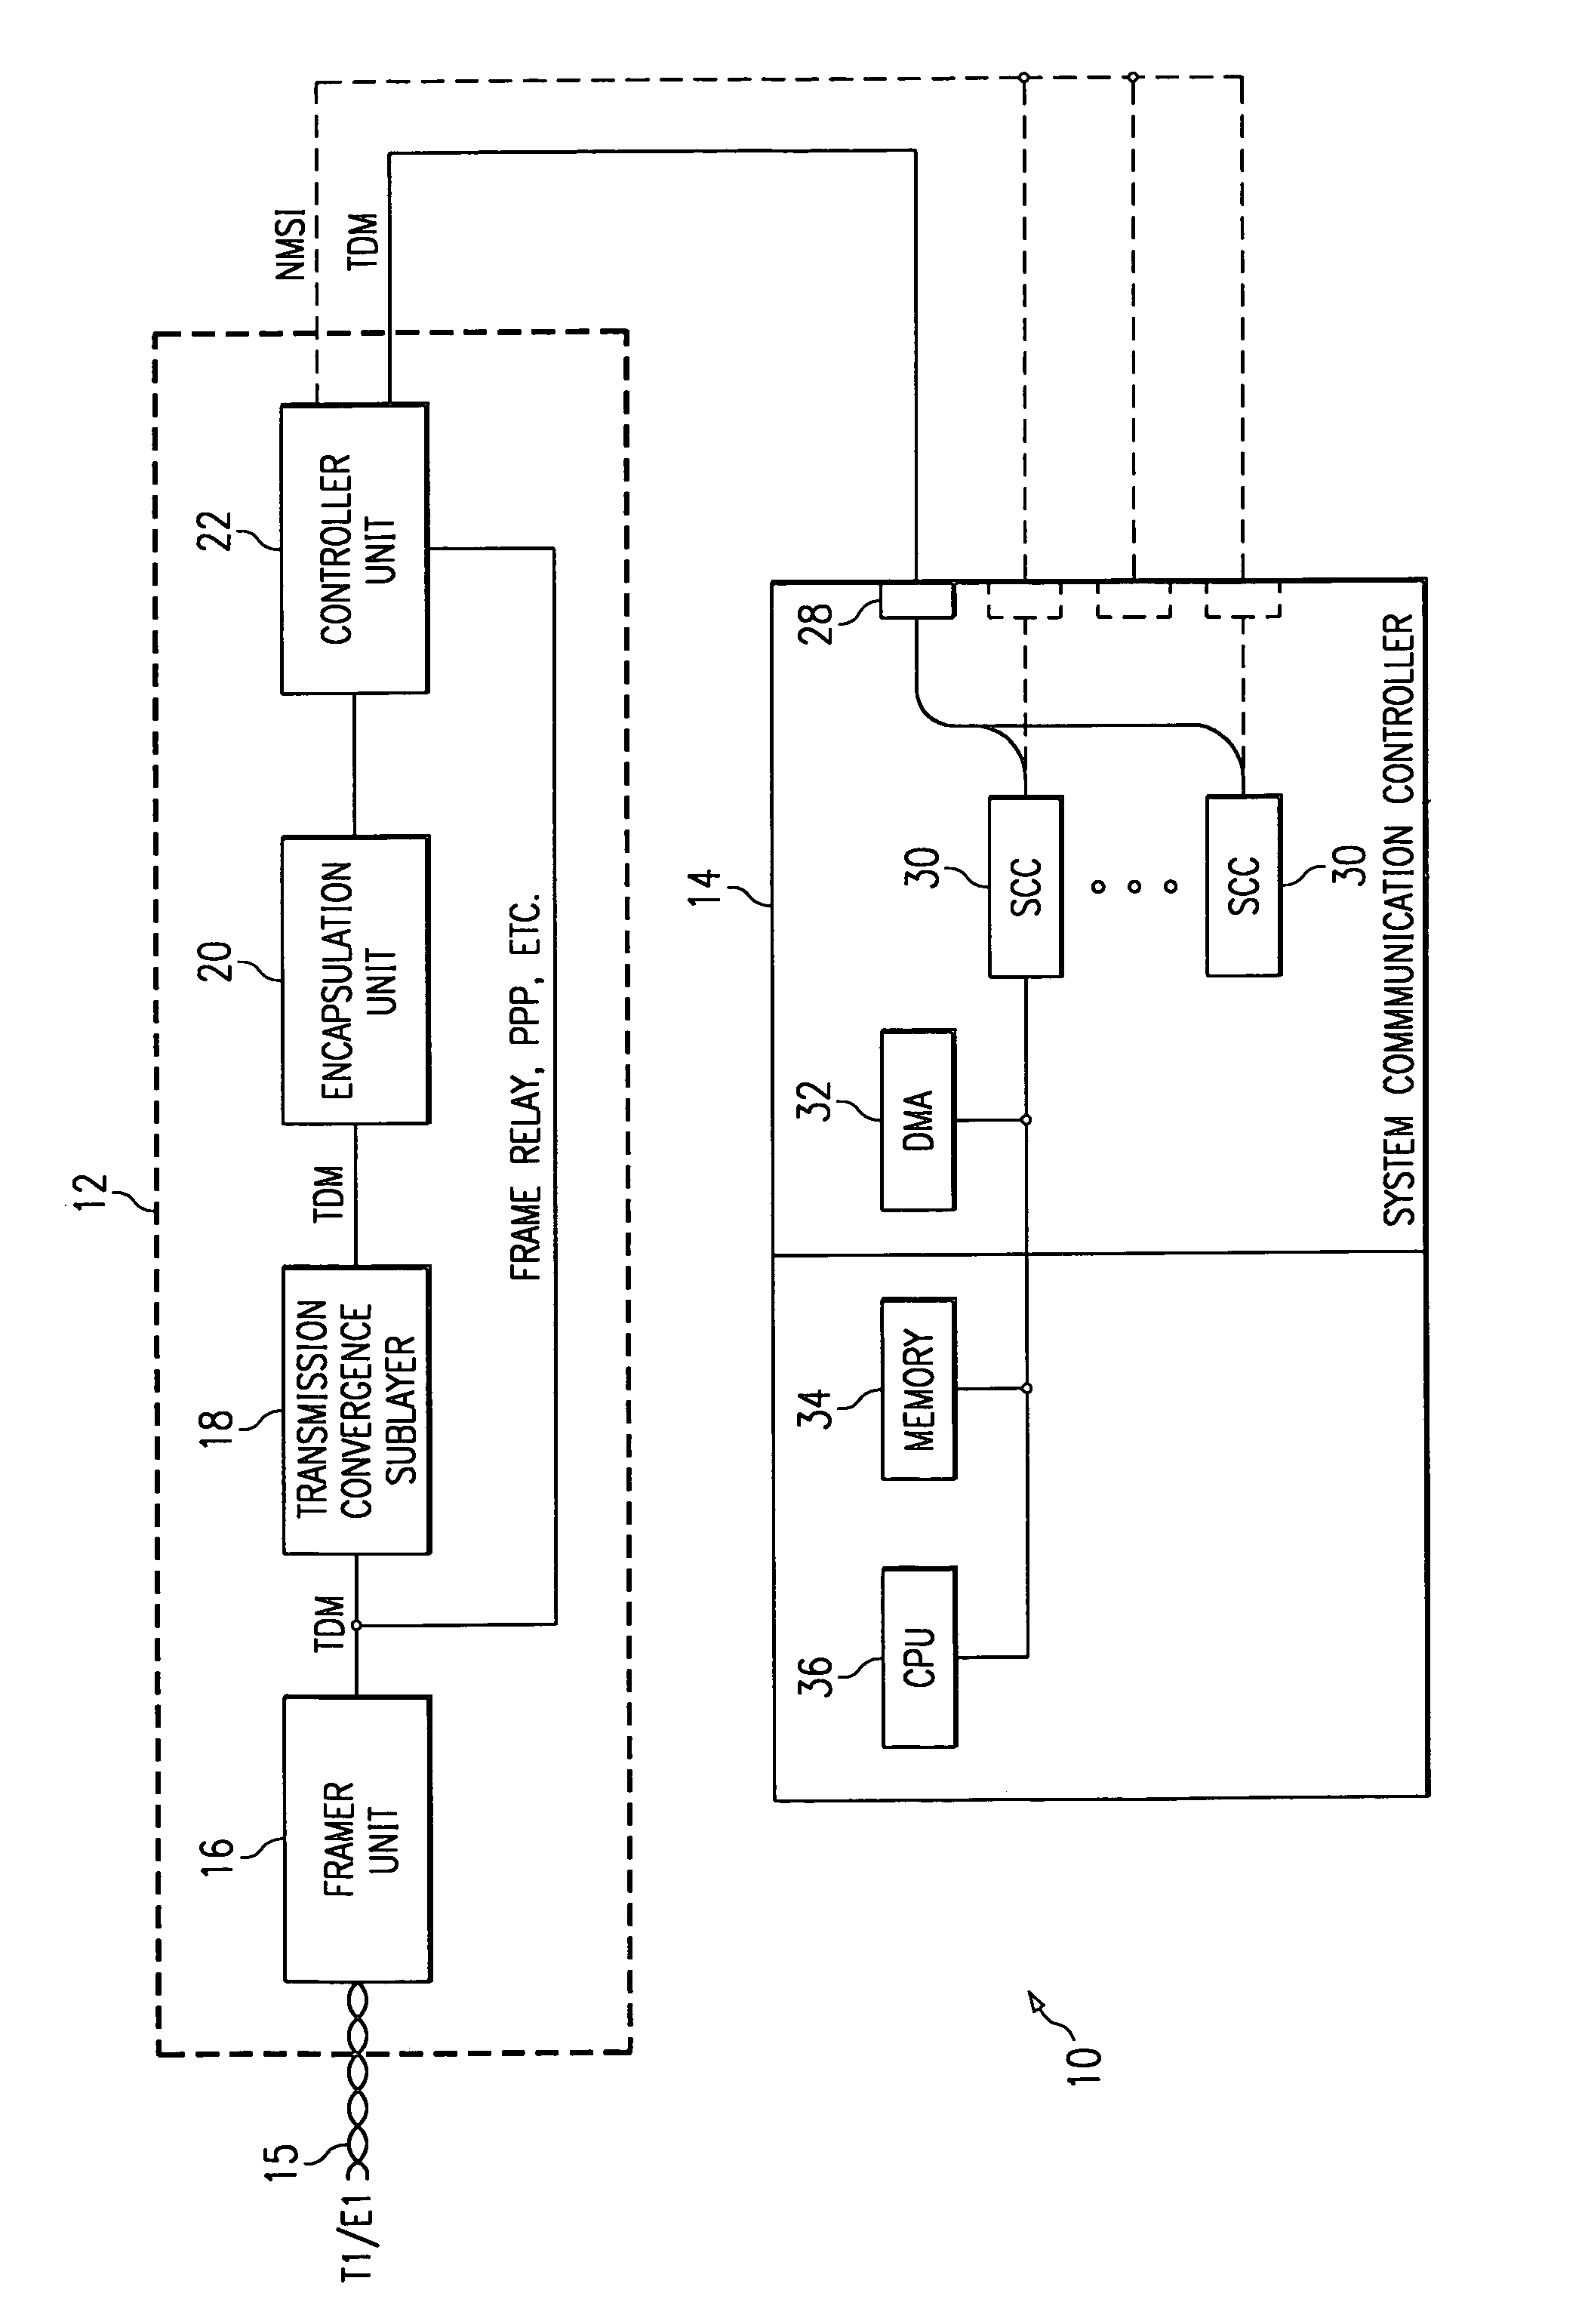 Device for interworking asynchronous transfer mode cells